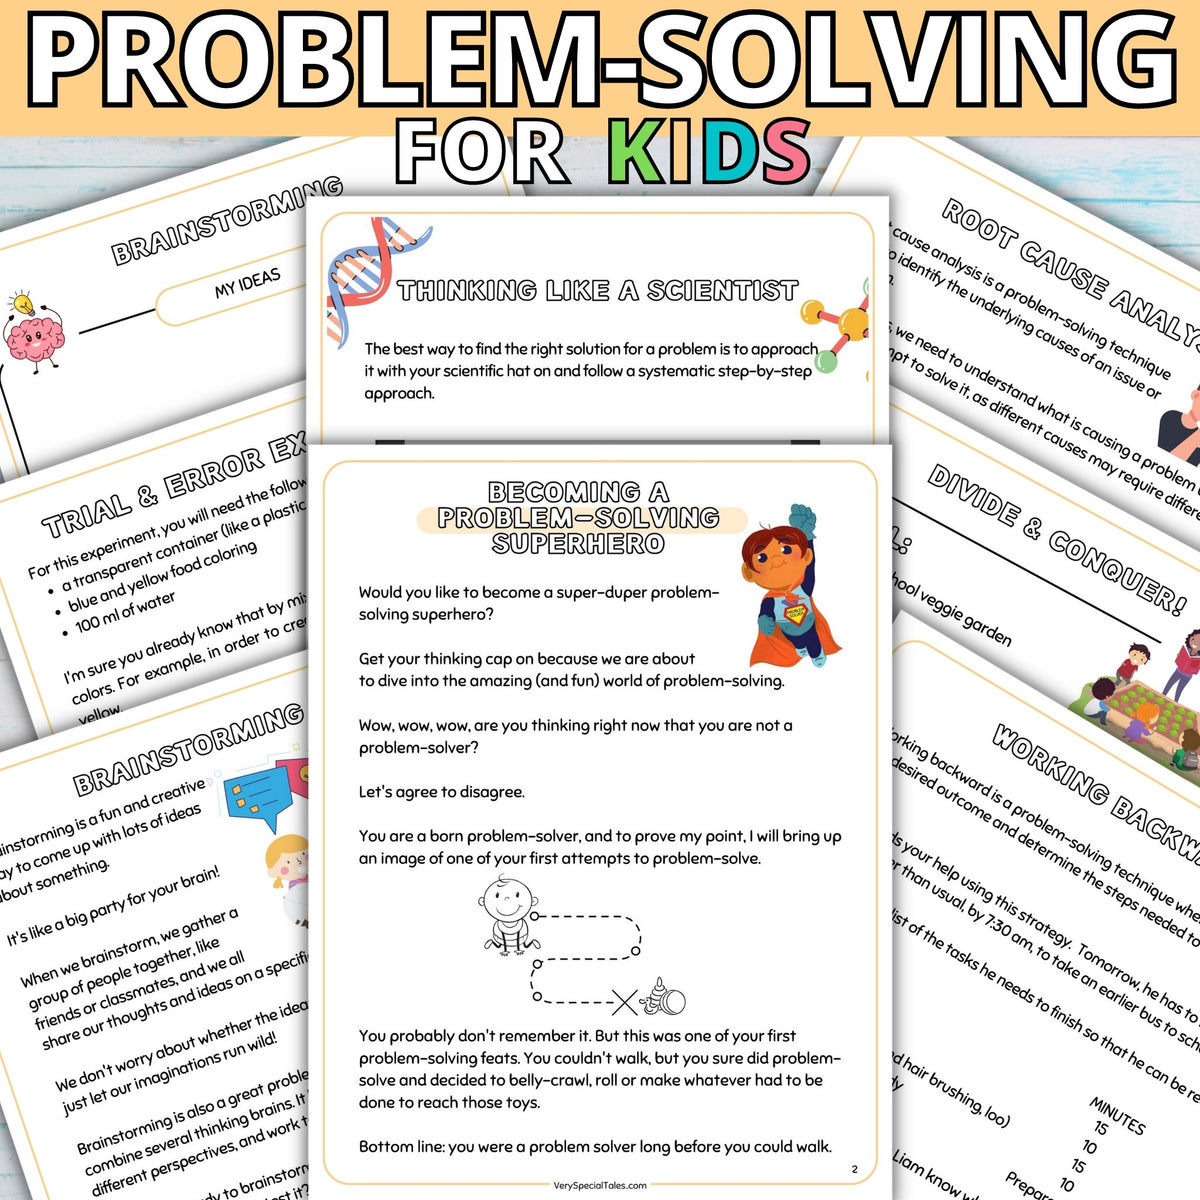 Examples of worksheets from the Problem-Solving for Kids Workbook, containing questions, prompts and playful illustrations.